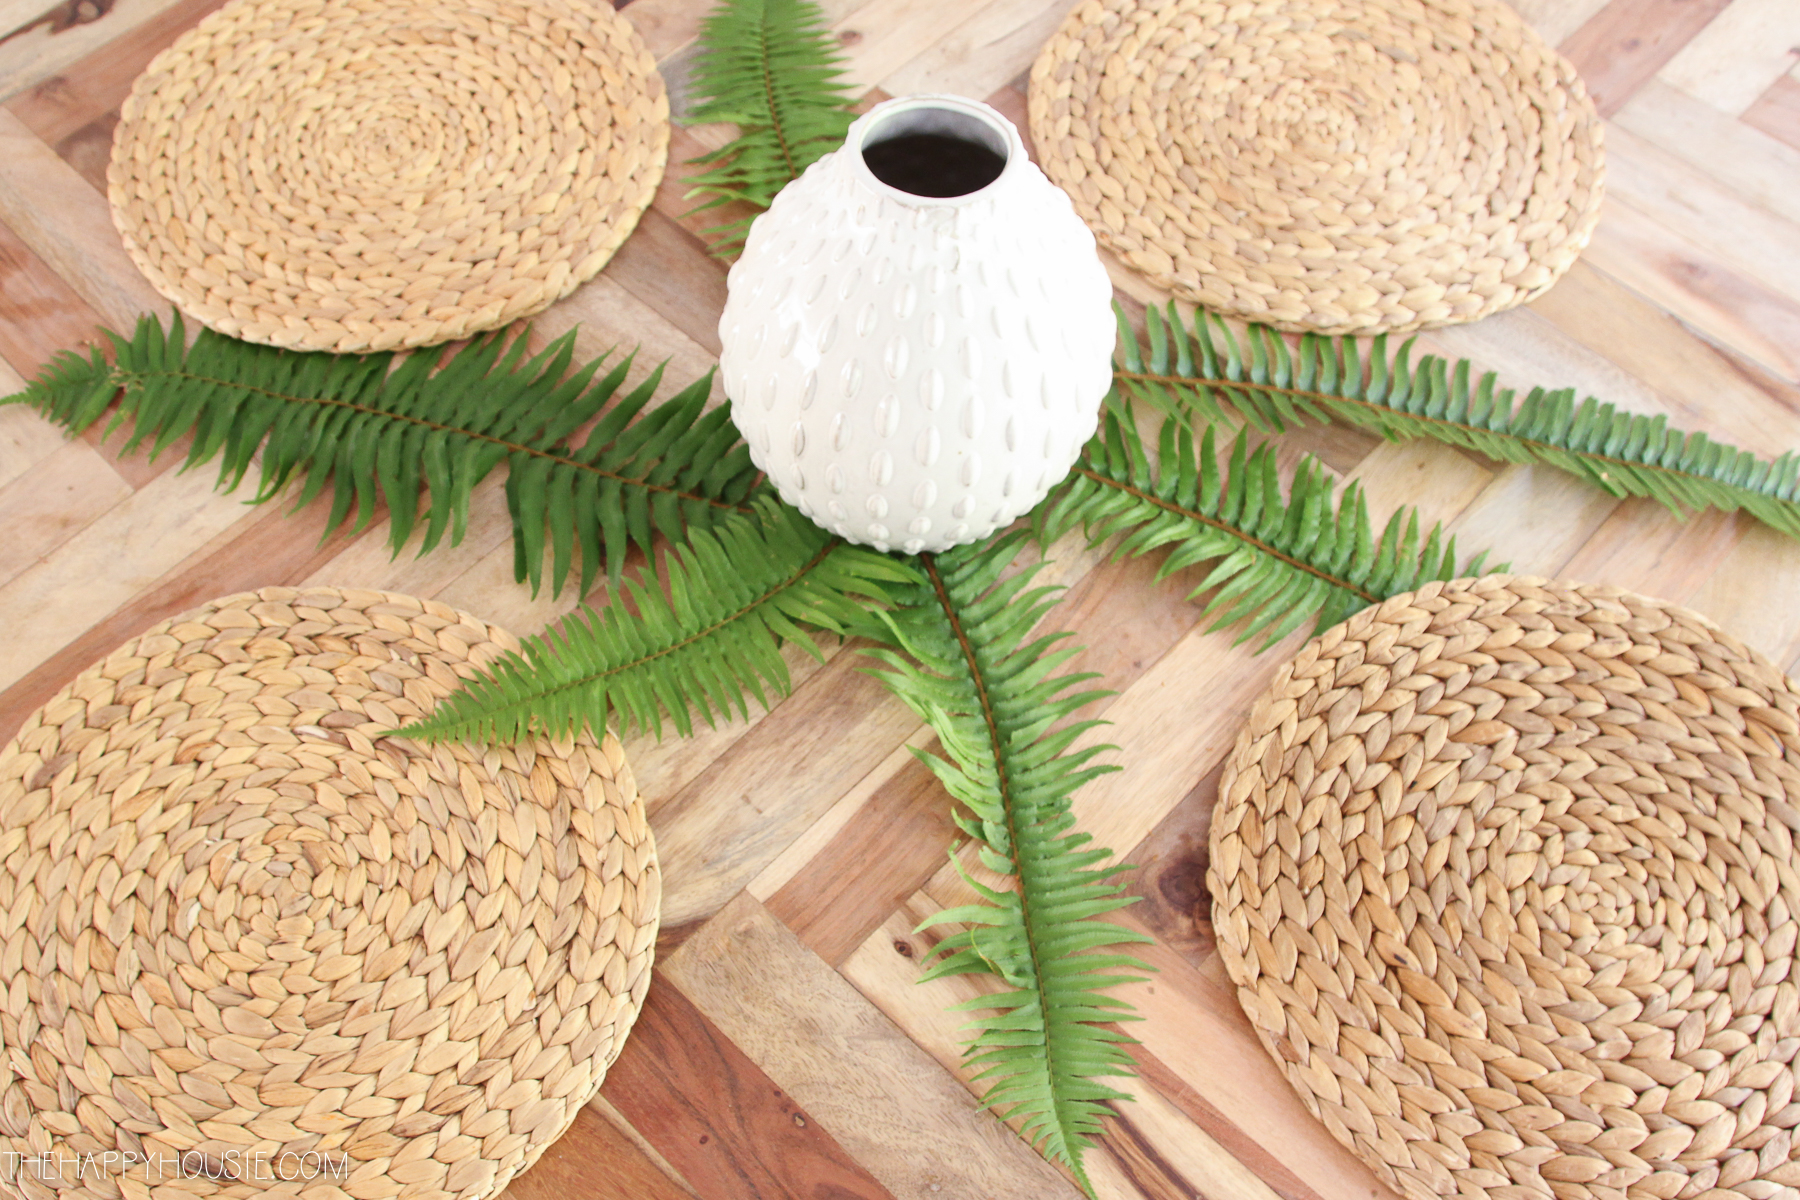 A white vase laid out with ferns underneath and sisal placemats around it.